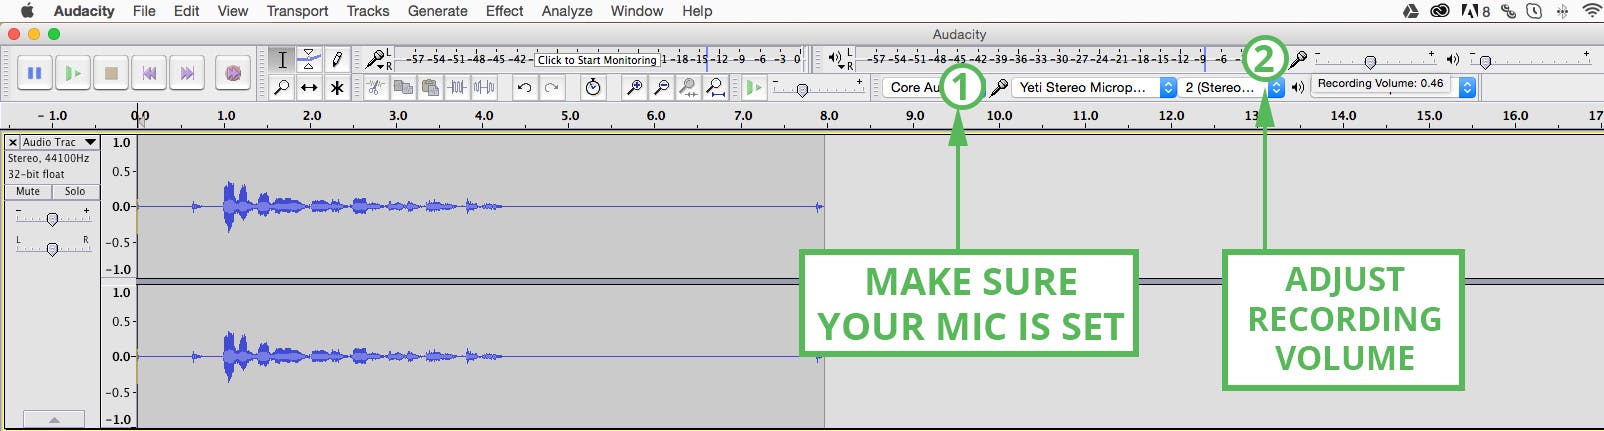 Checking mic levels in Audacity